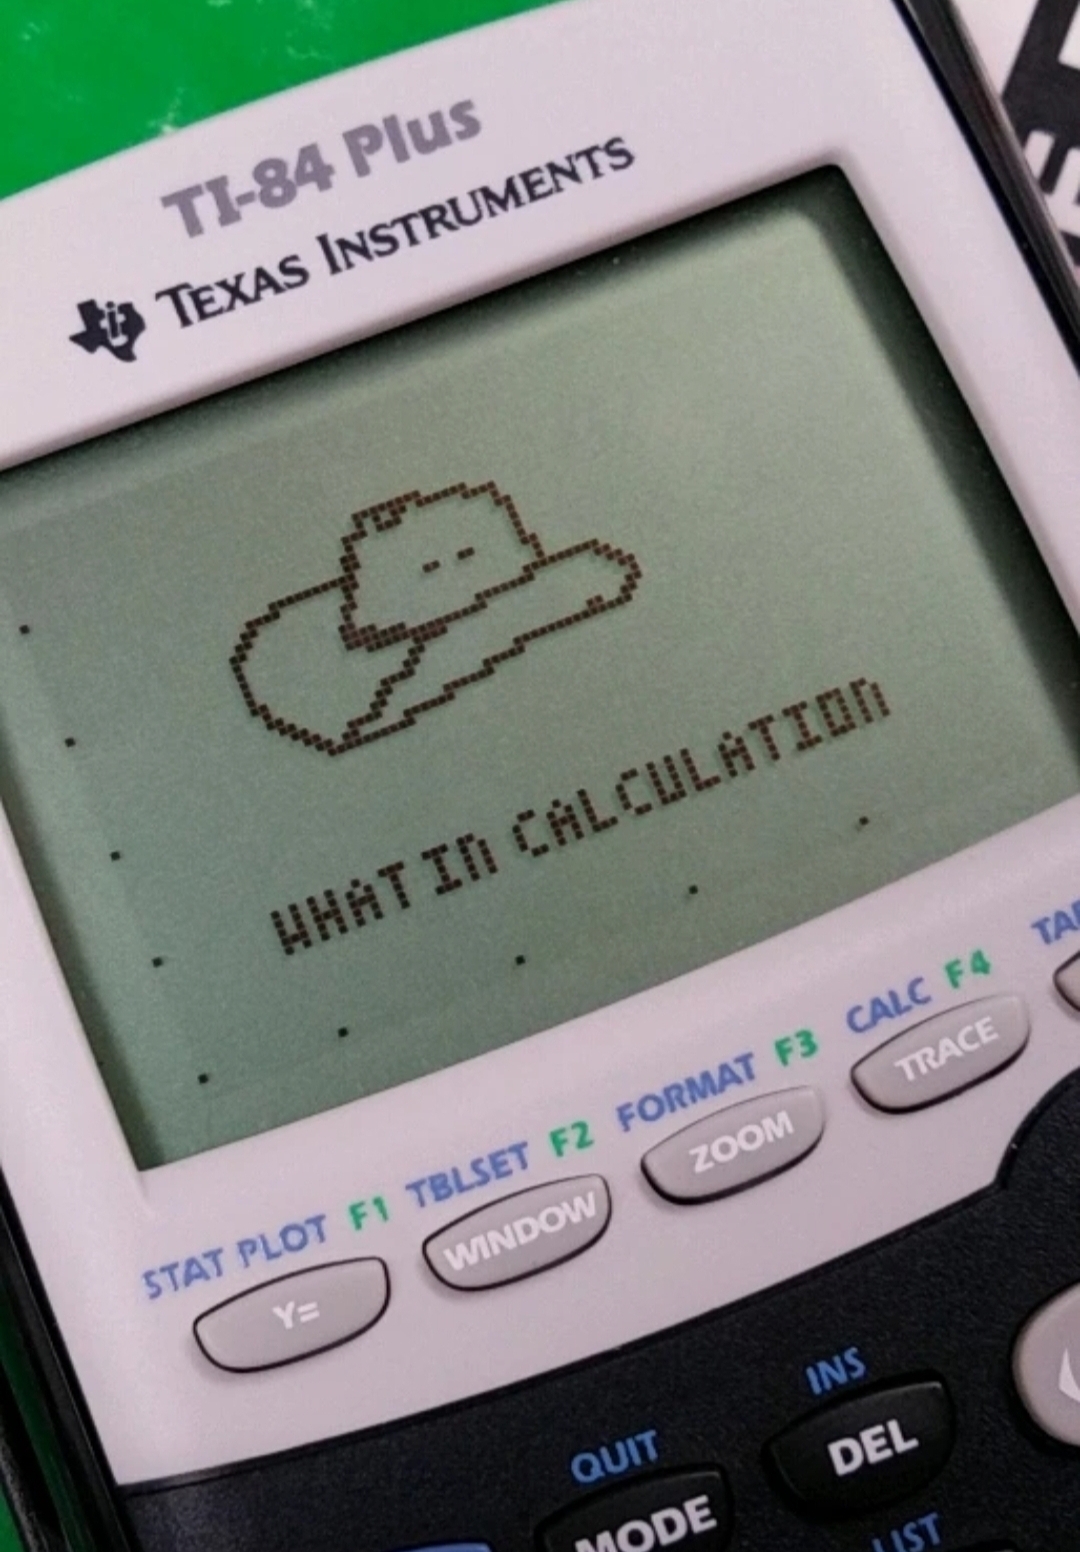 What in calculation